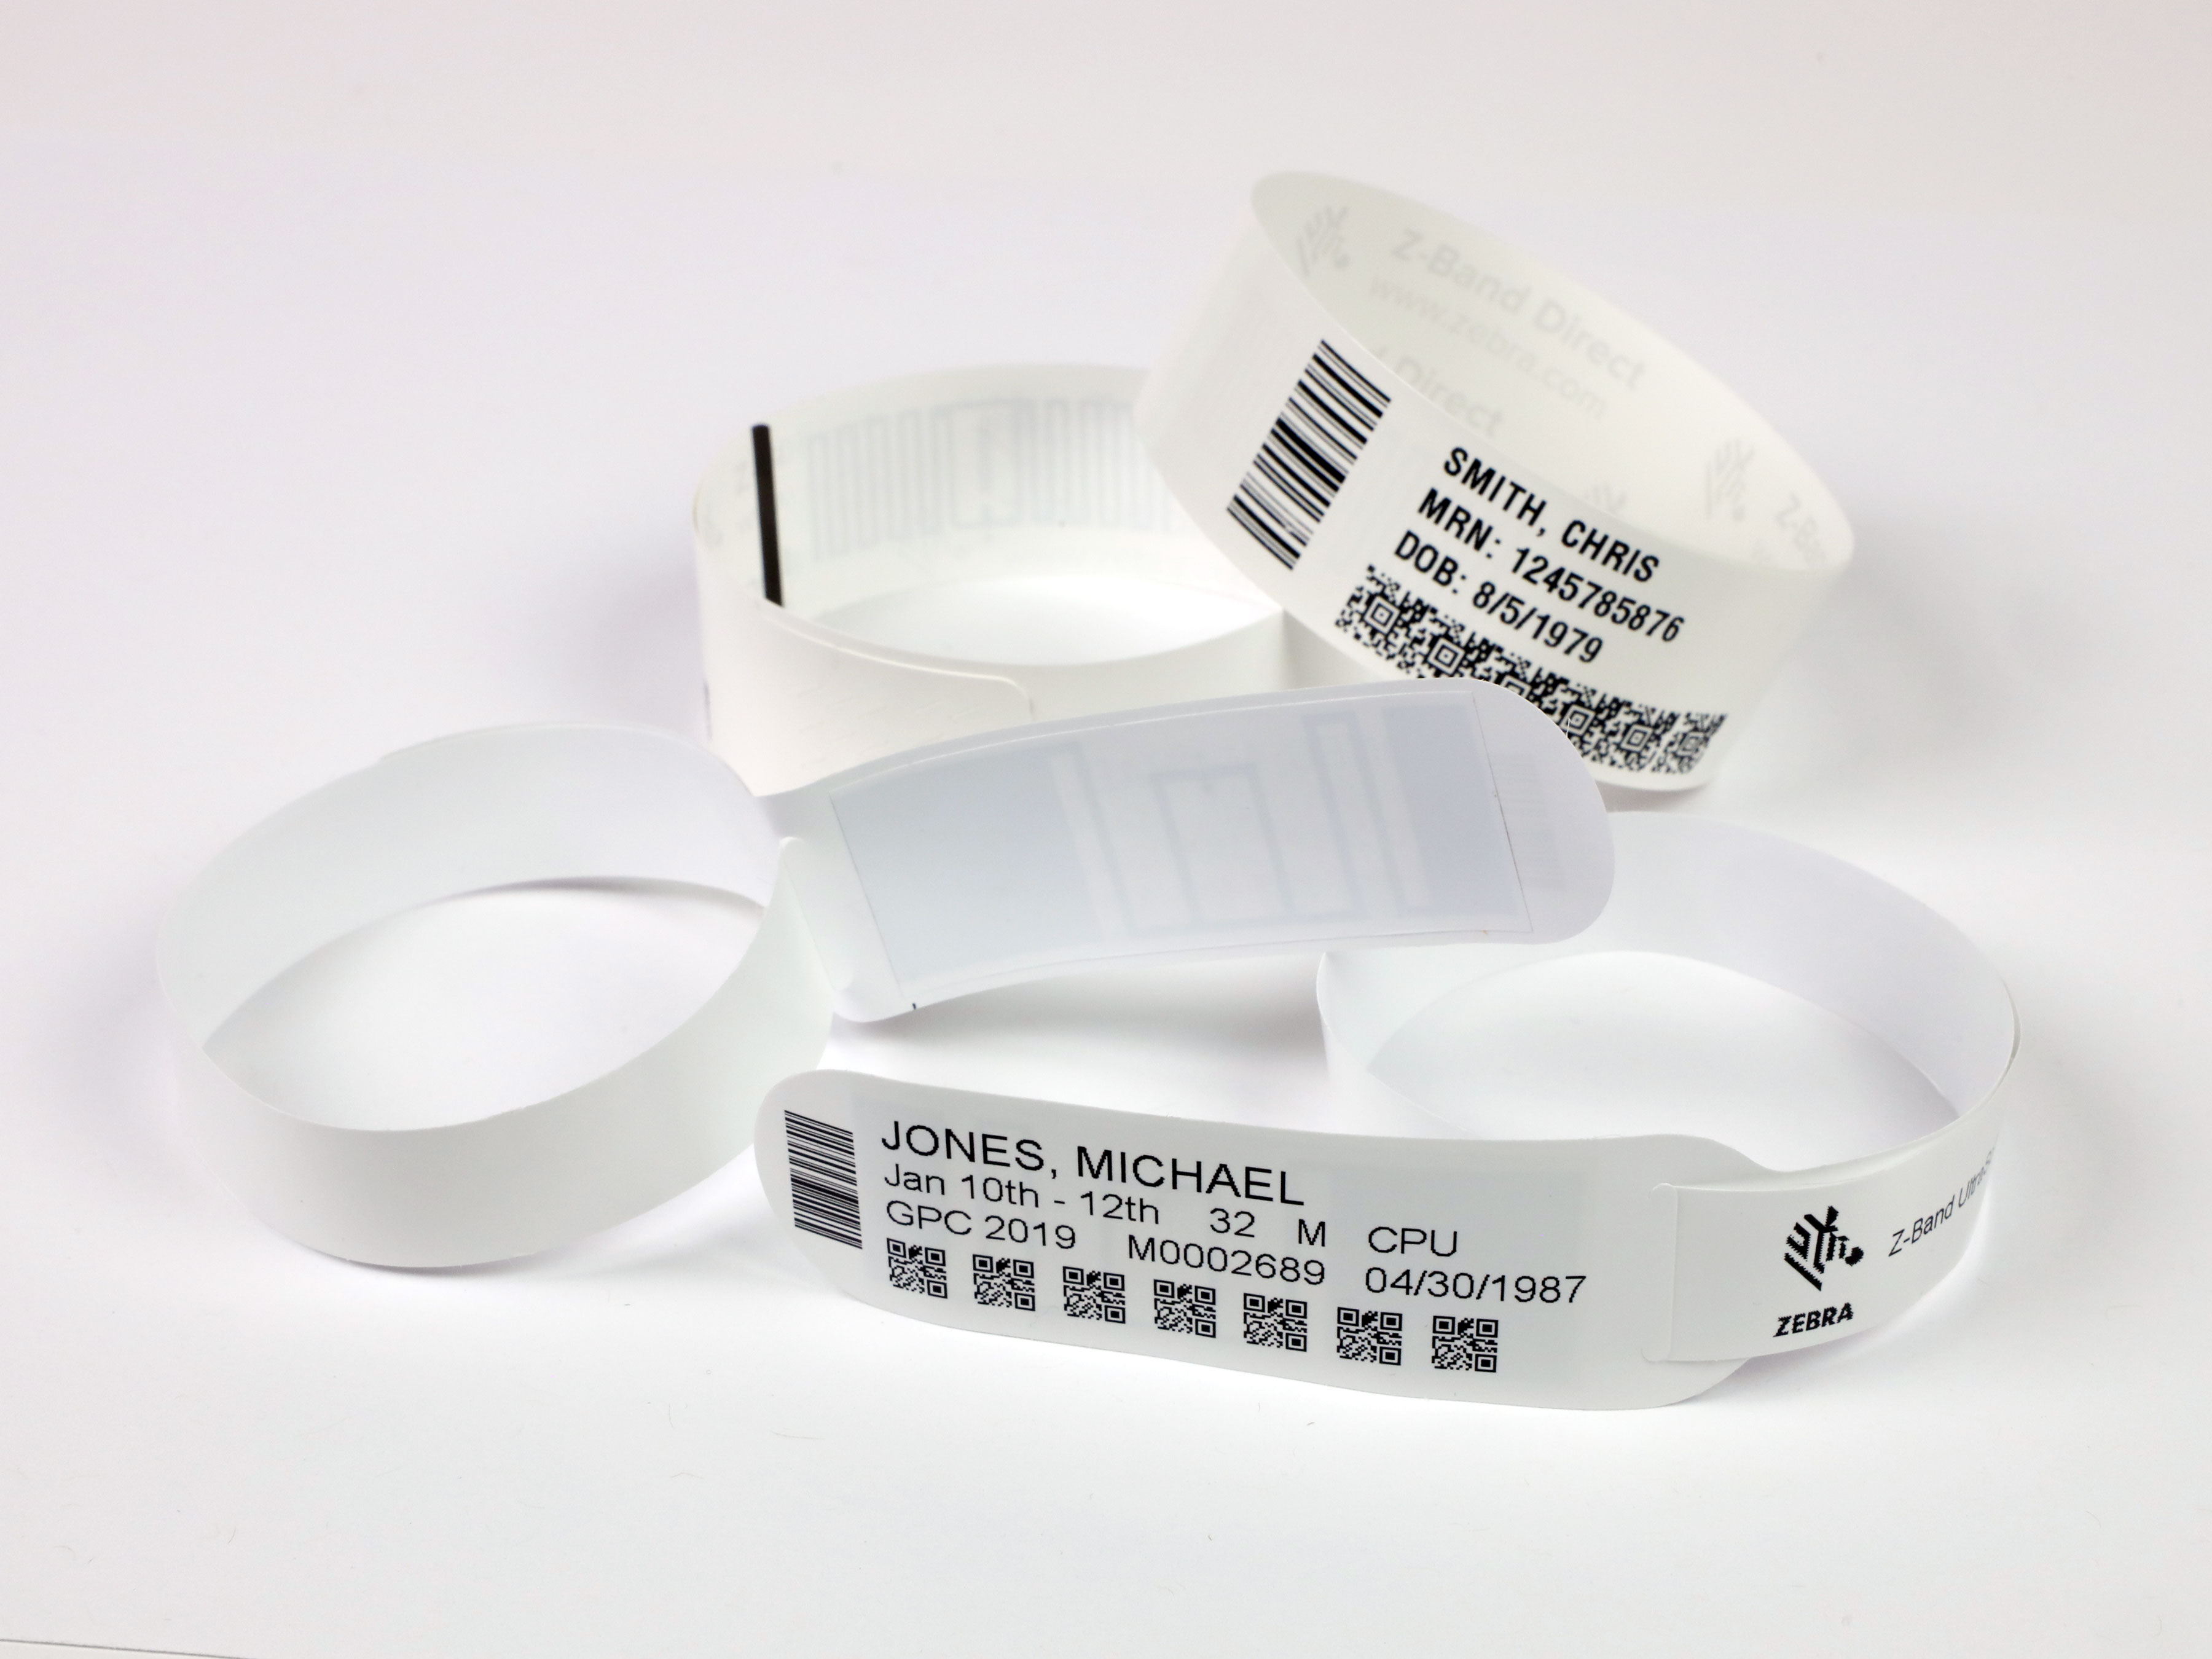 Front view of Z-Band UHF RFID Wristbands